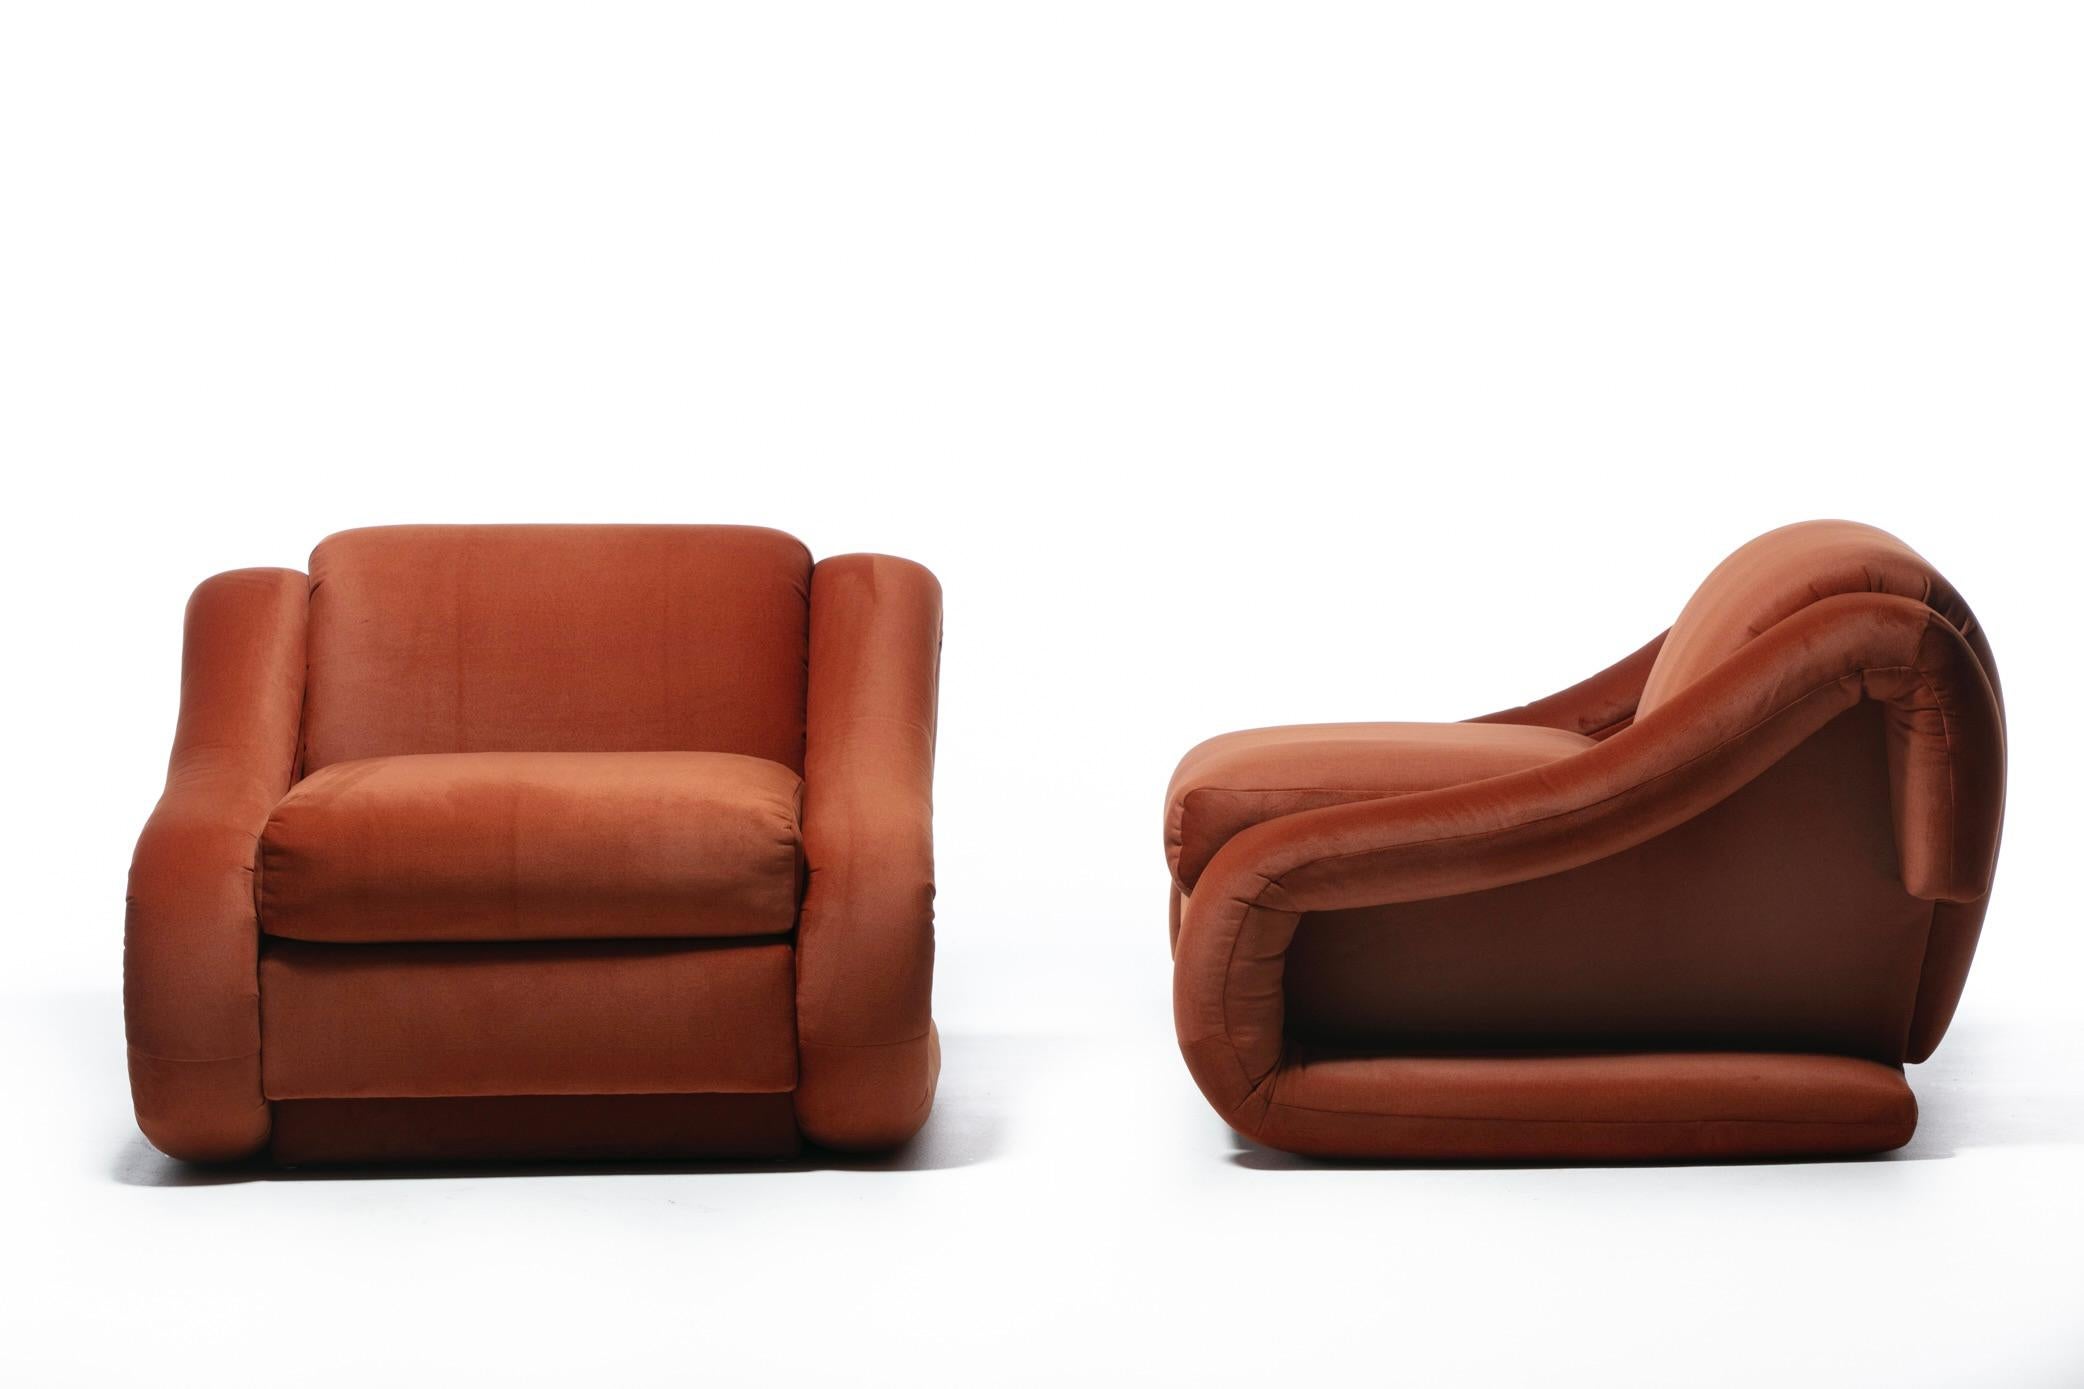 Monumental Post Modern Pair of Weiman Lounge Chairs in Marmalade Orange Fabric In Good Condition For Sale In Saint Louis, MO